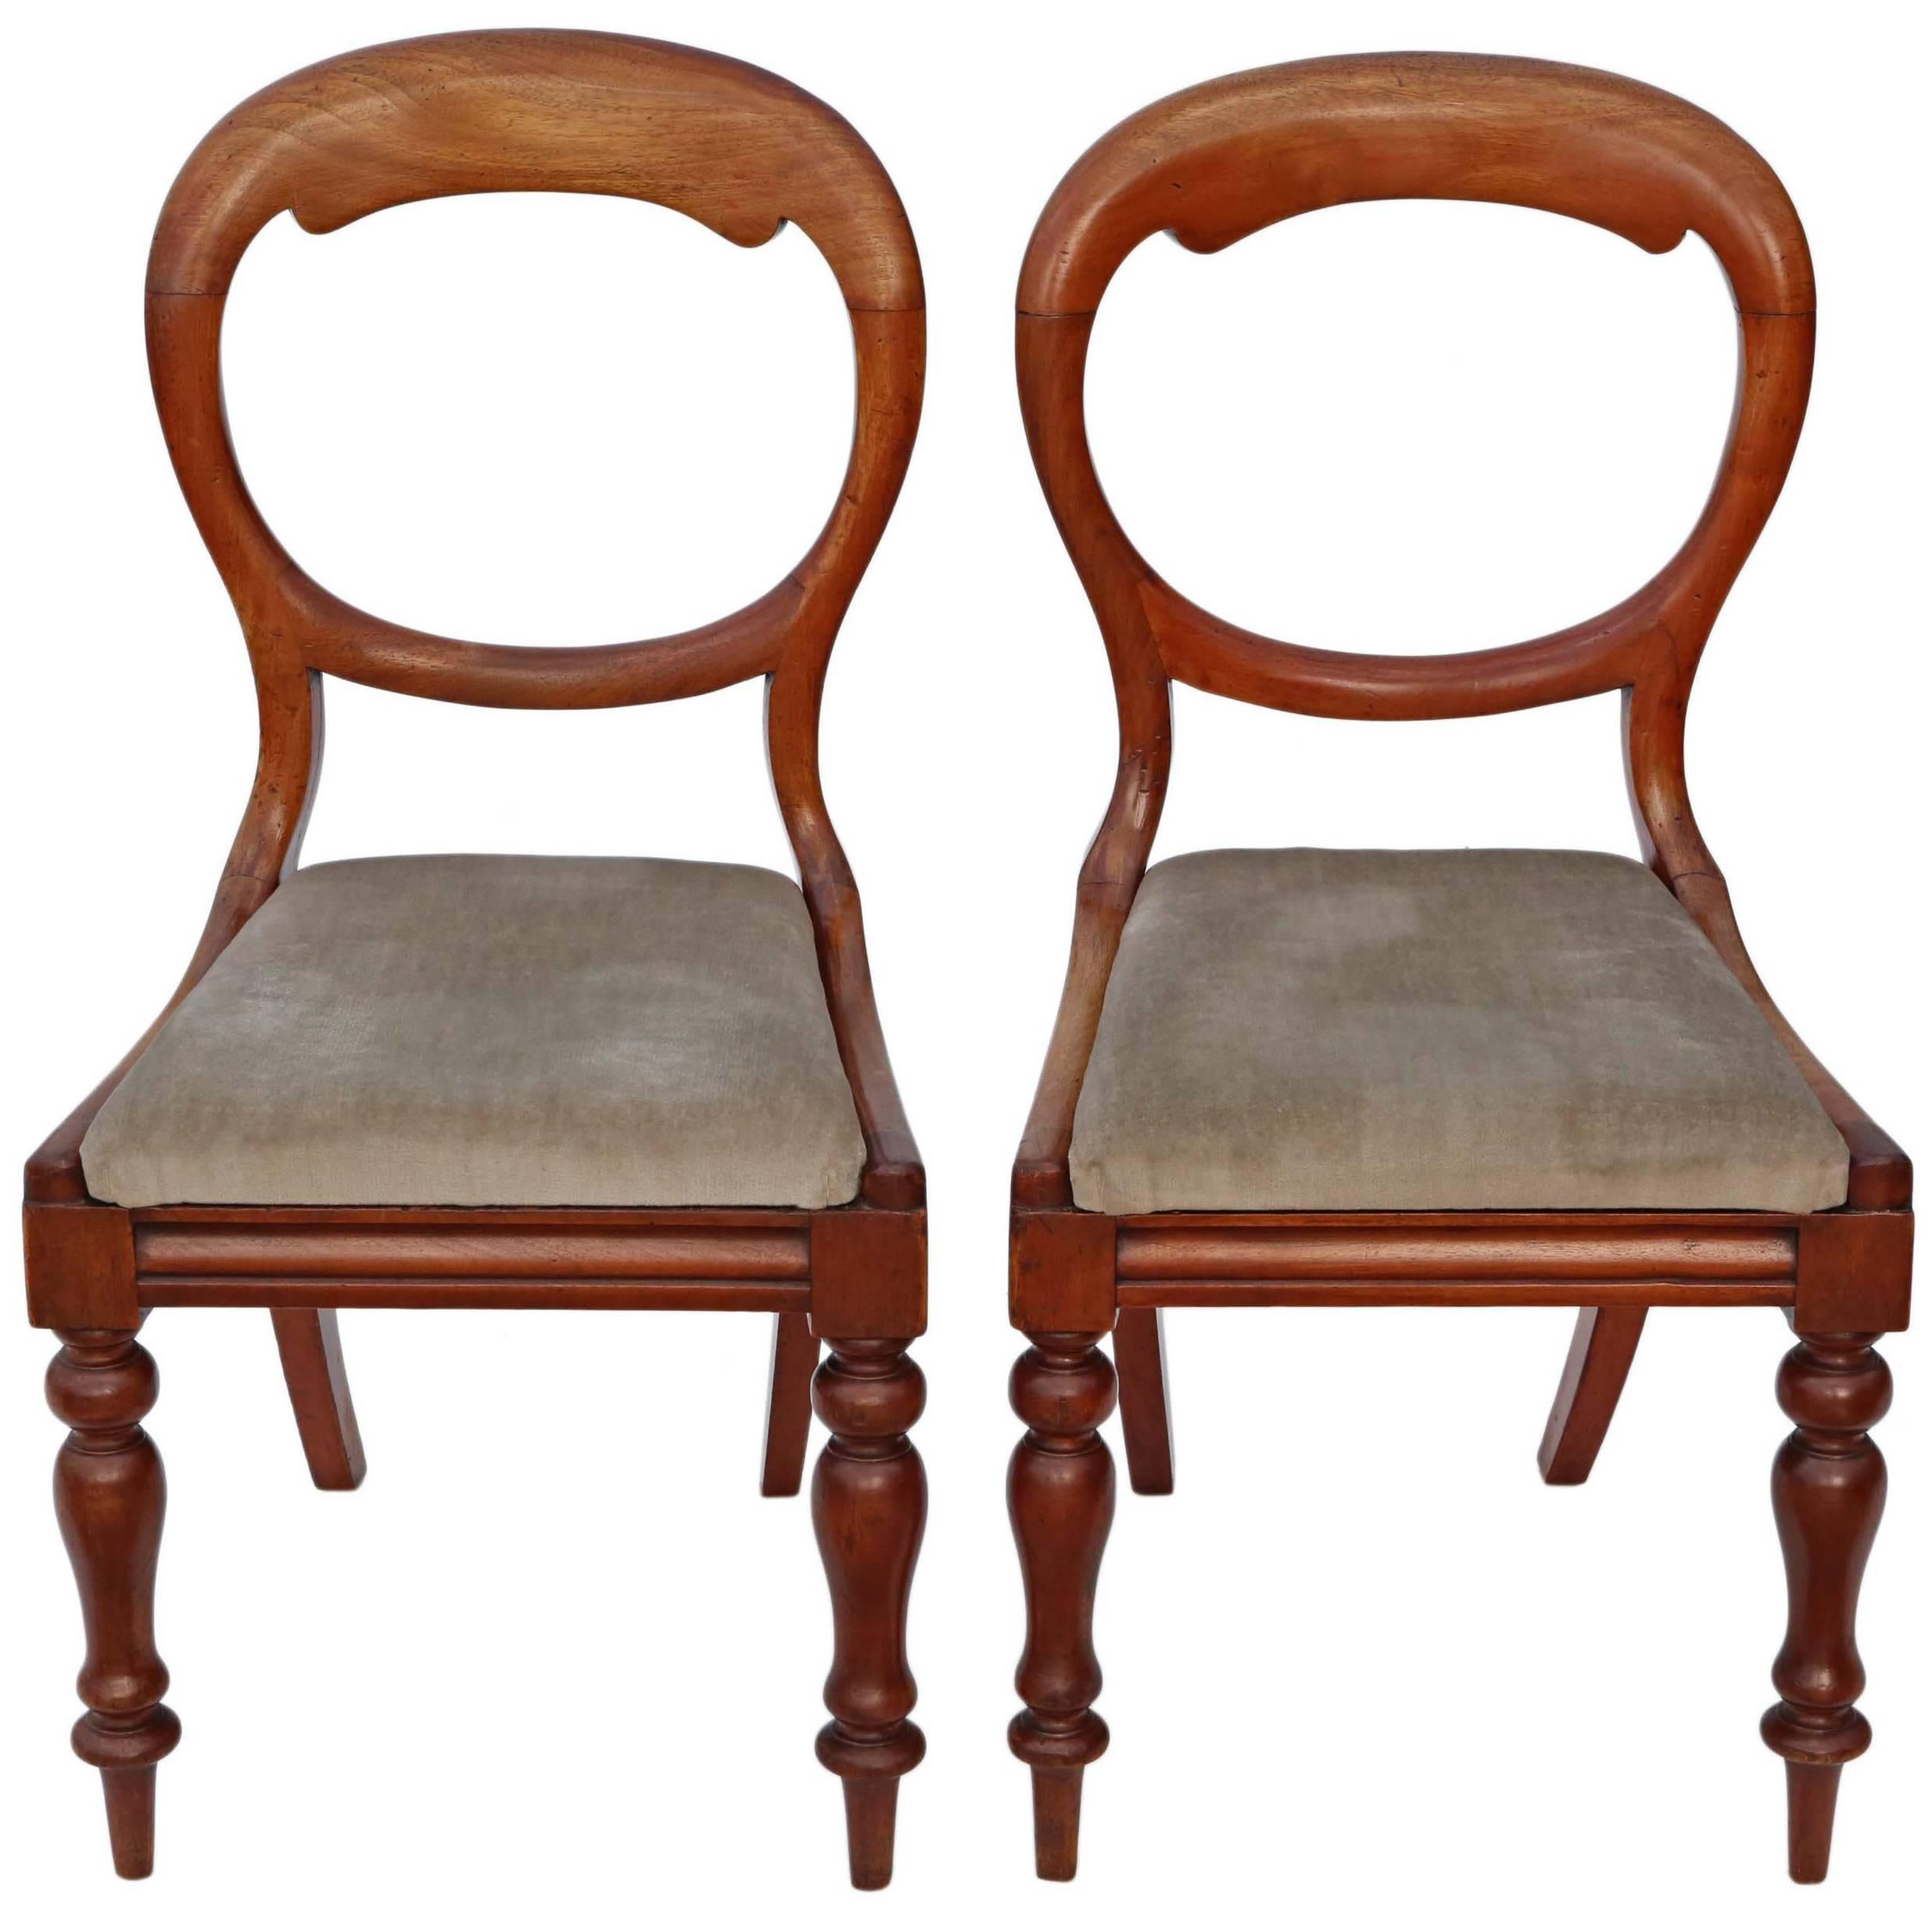 Antique Quality Pair of Victorian circa 1880 Mahogany Balloon Back Dining Chairs For Sale